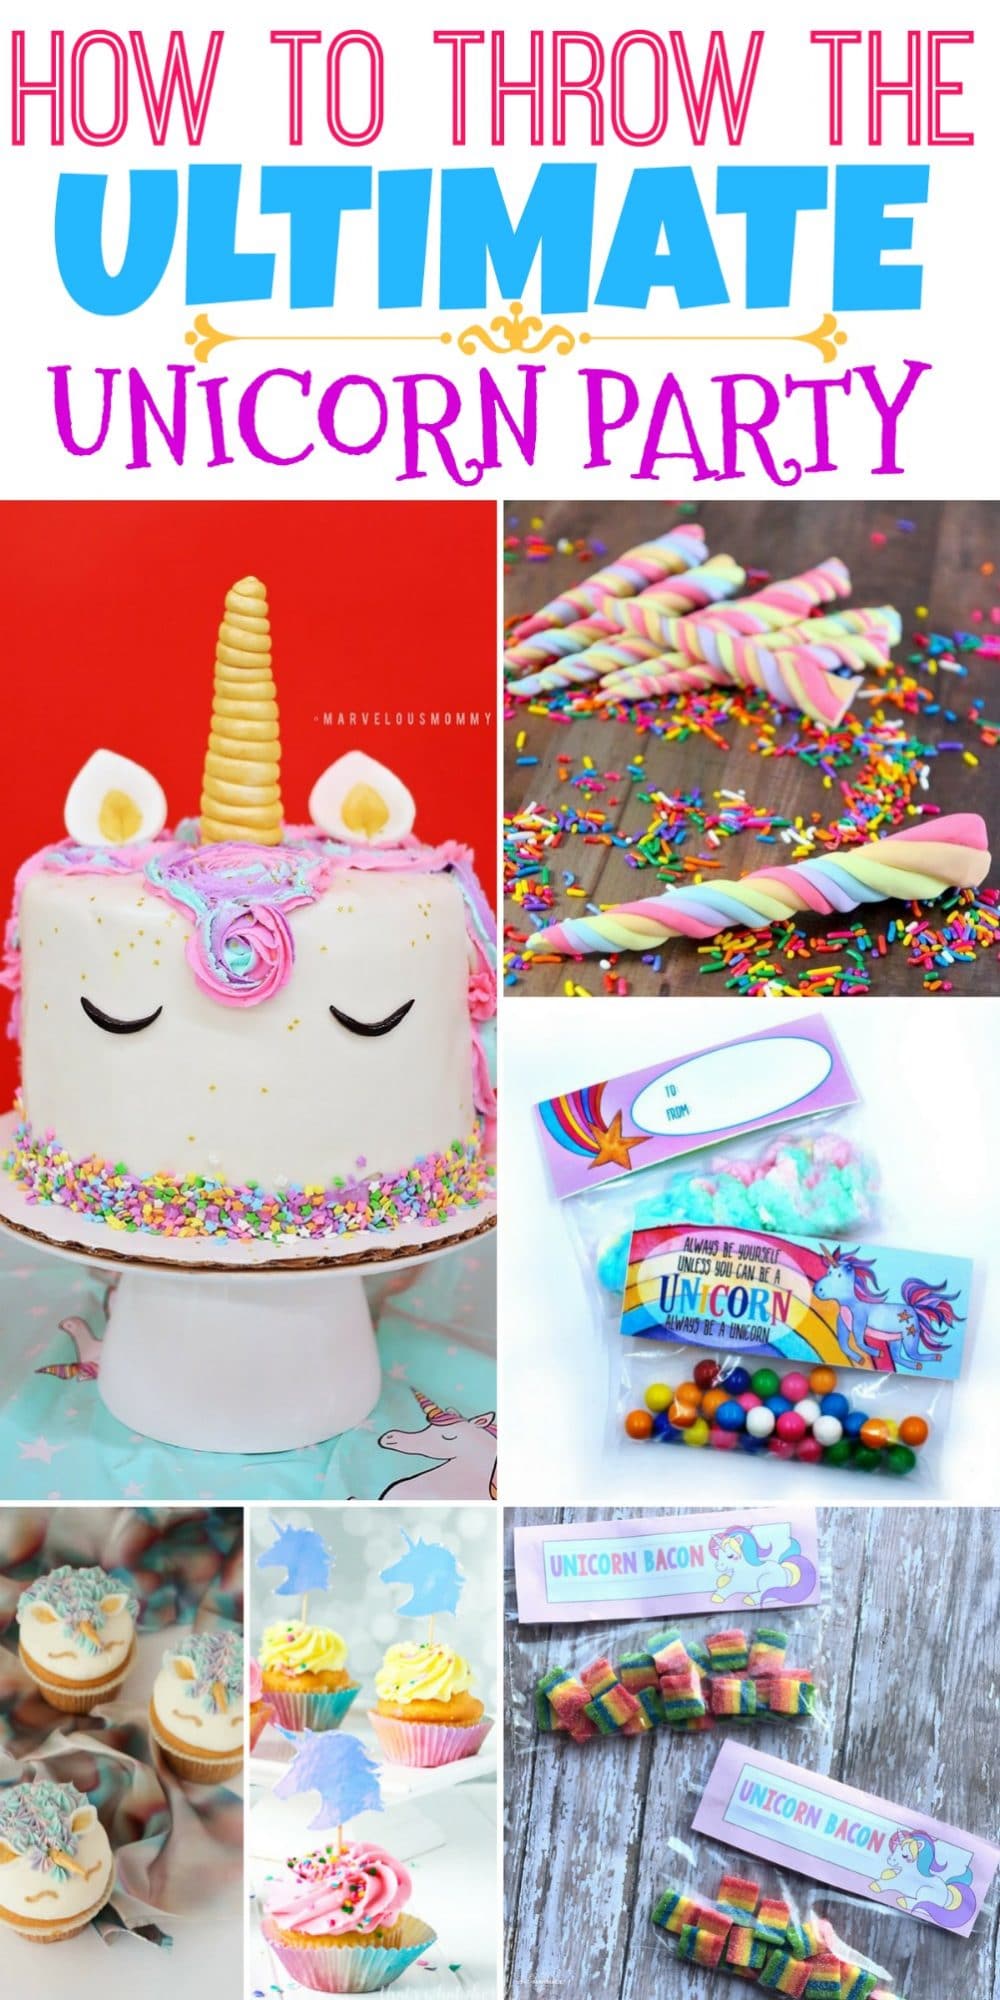 How to Throw the Ultimate Unicorn Party